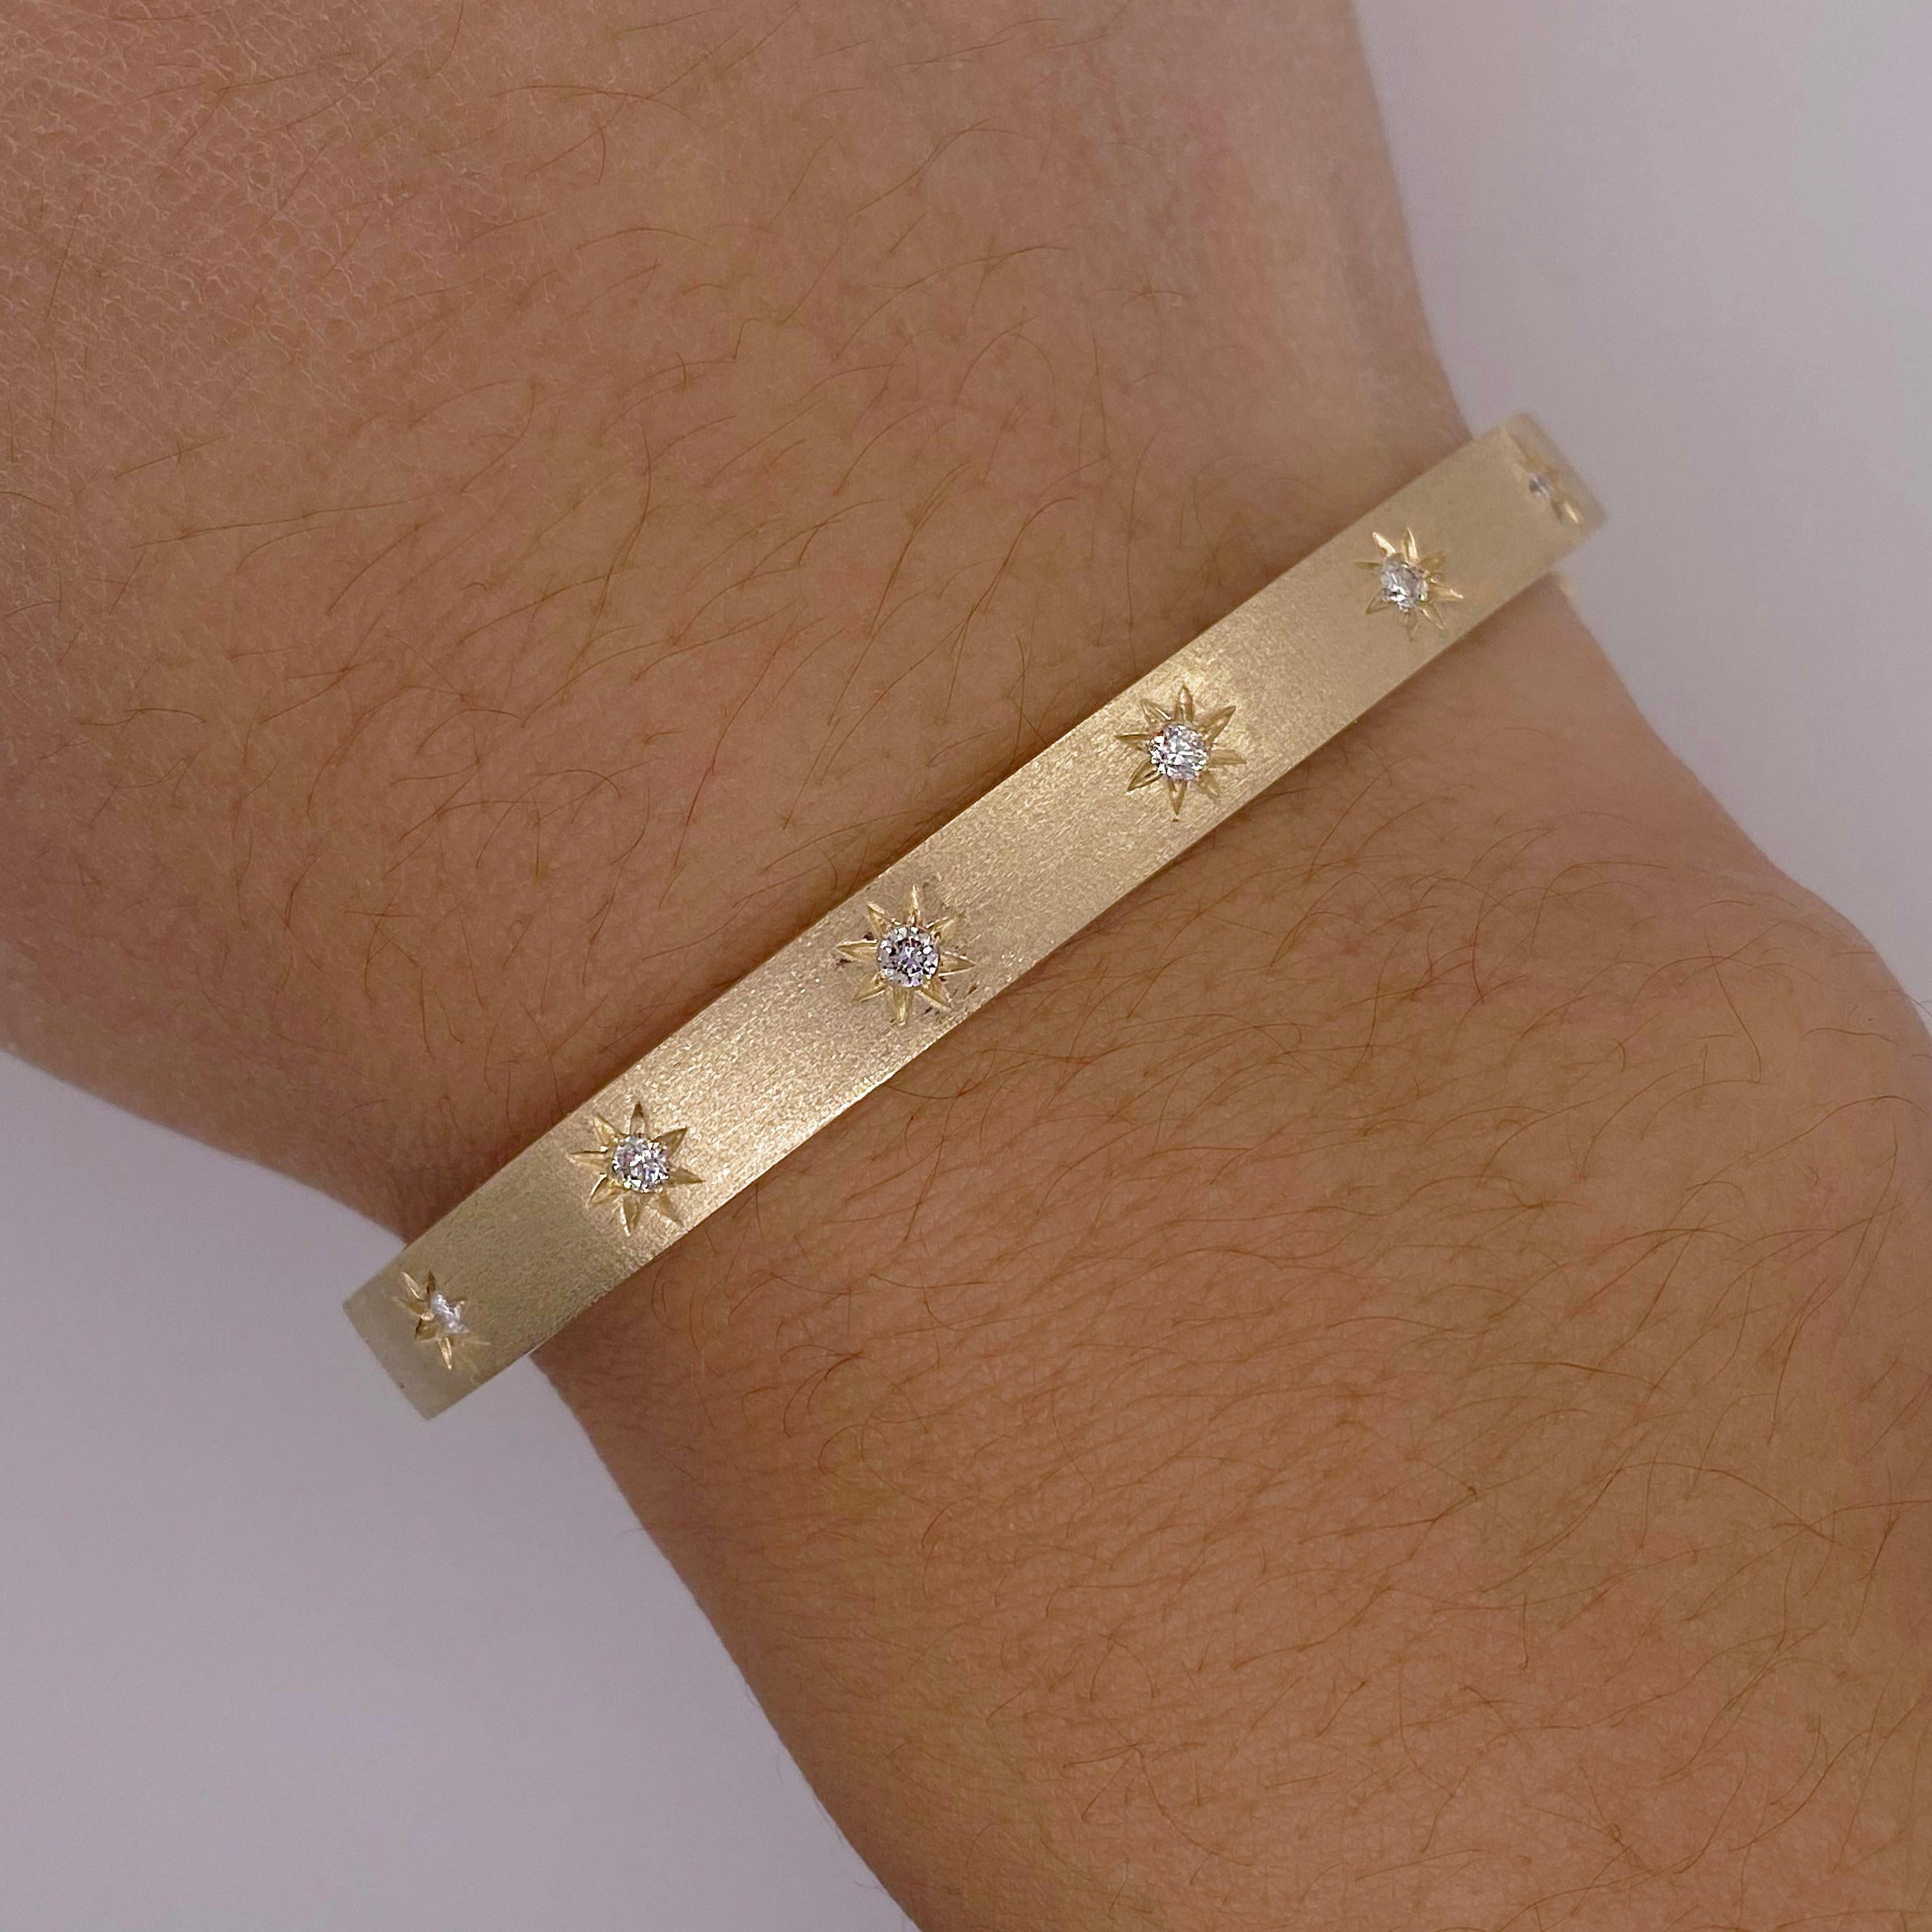 This starlight bangle is beautiful on its own, with other bangles, or next to a watch and created in recycled 14 karat yellow gold. It has a matching ring to make a lovely set. The diamonds are flush-set within the stars to make the bangle sparkle